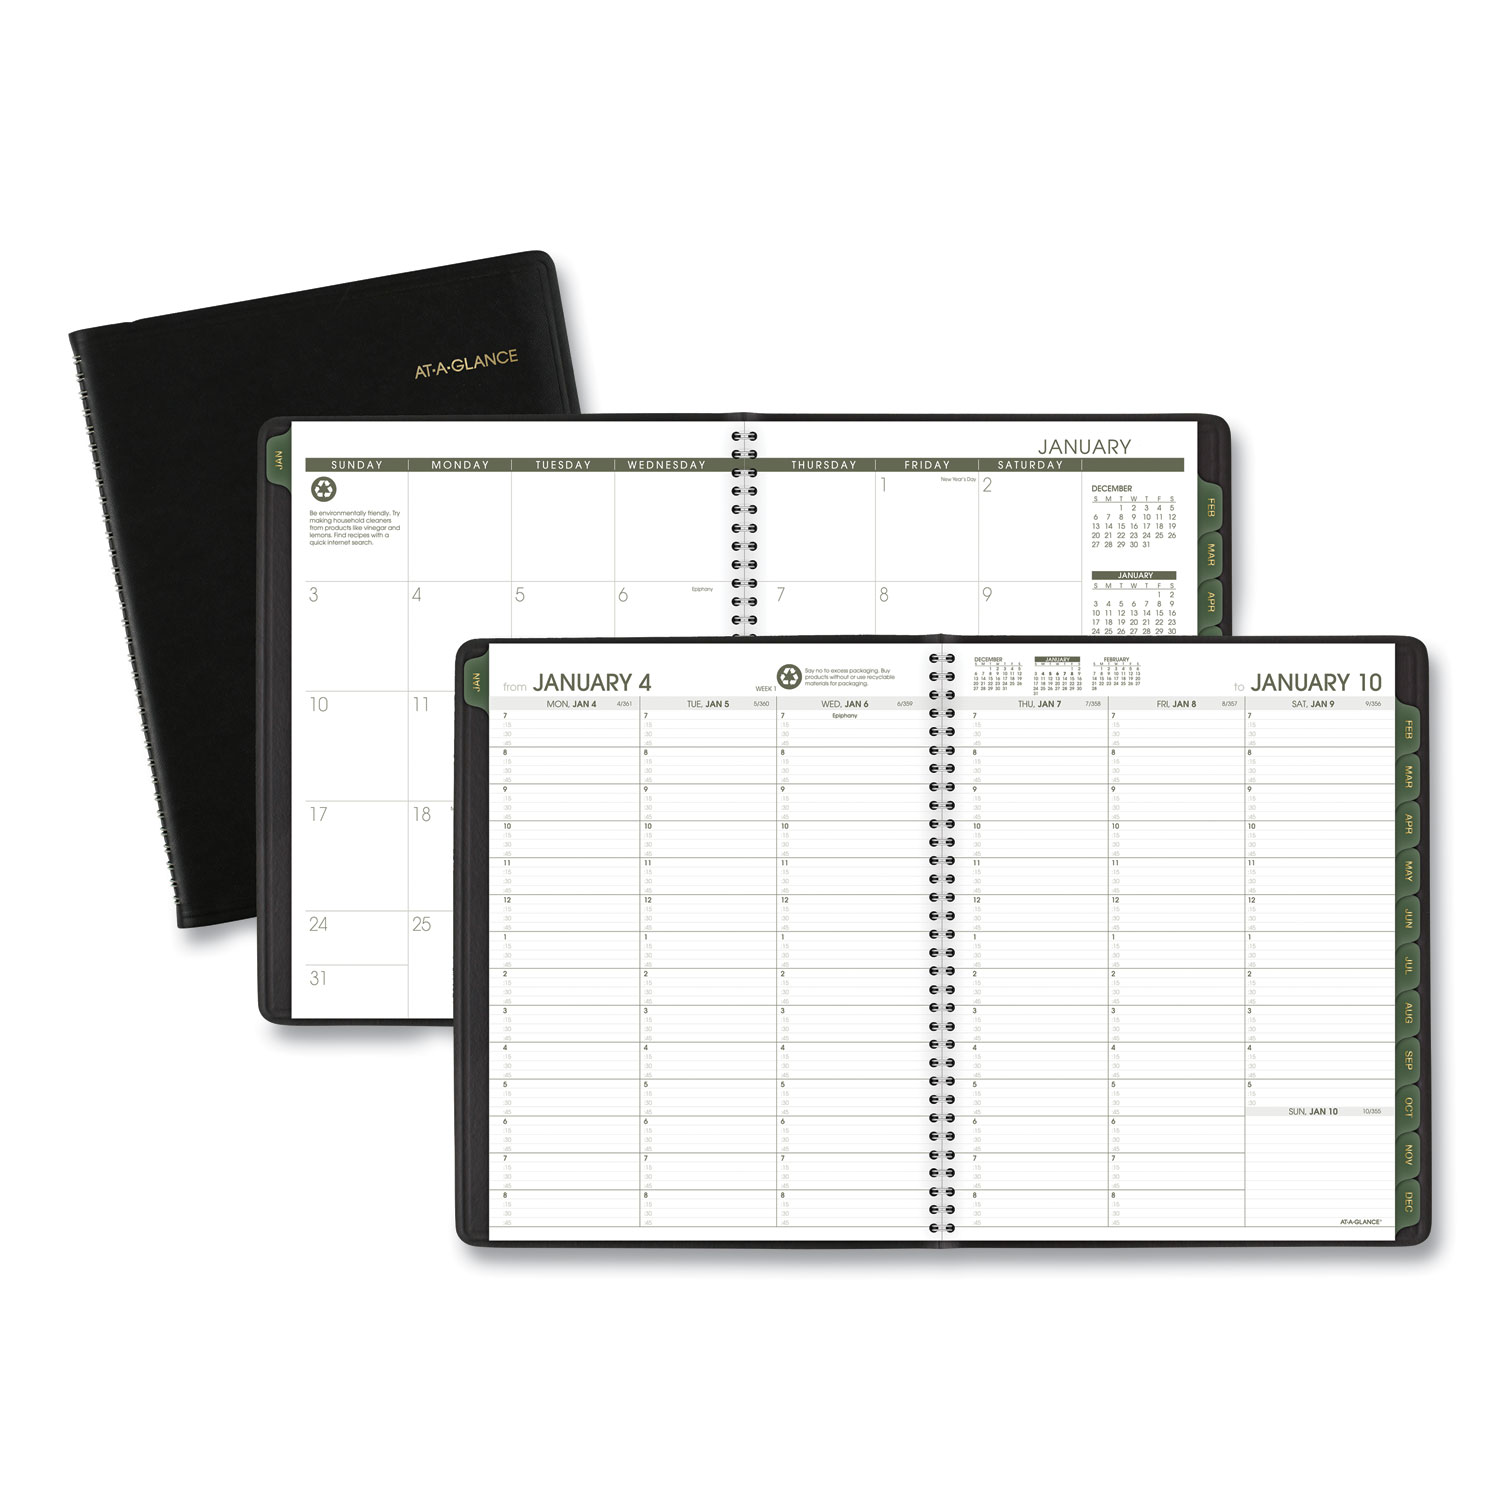  AT-A-GLANCE 70950G05 Recycled Weekly/Monthly Classic Appointment Book, 10.88 x 8.25, Black, 2020 (AAG70950G05) 